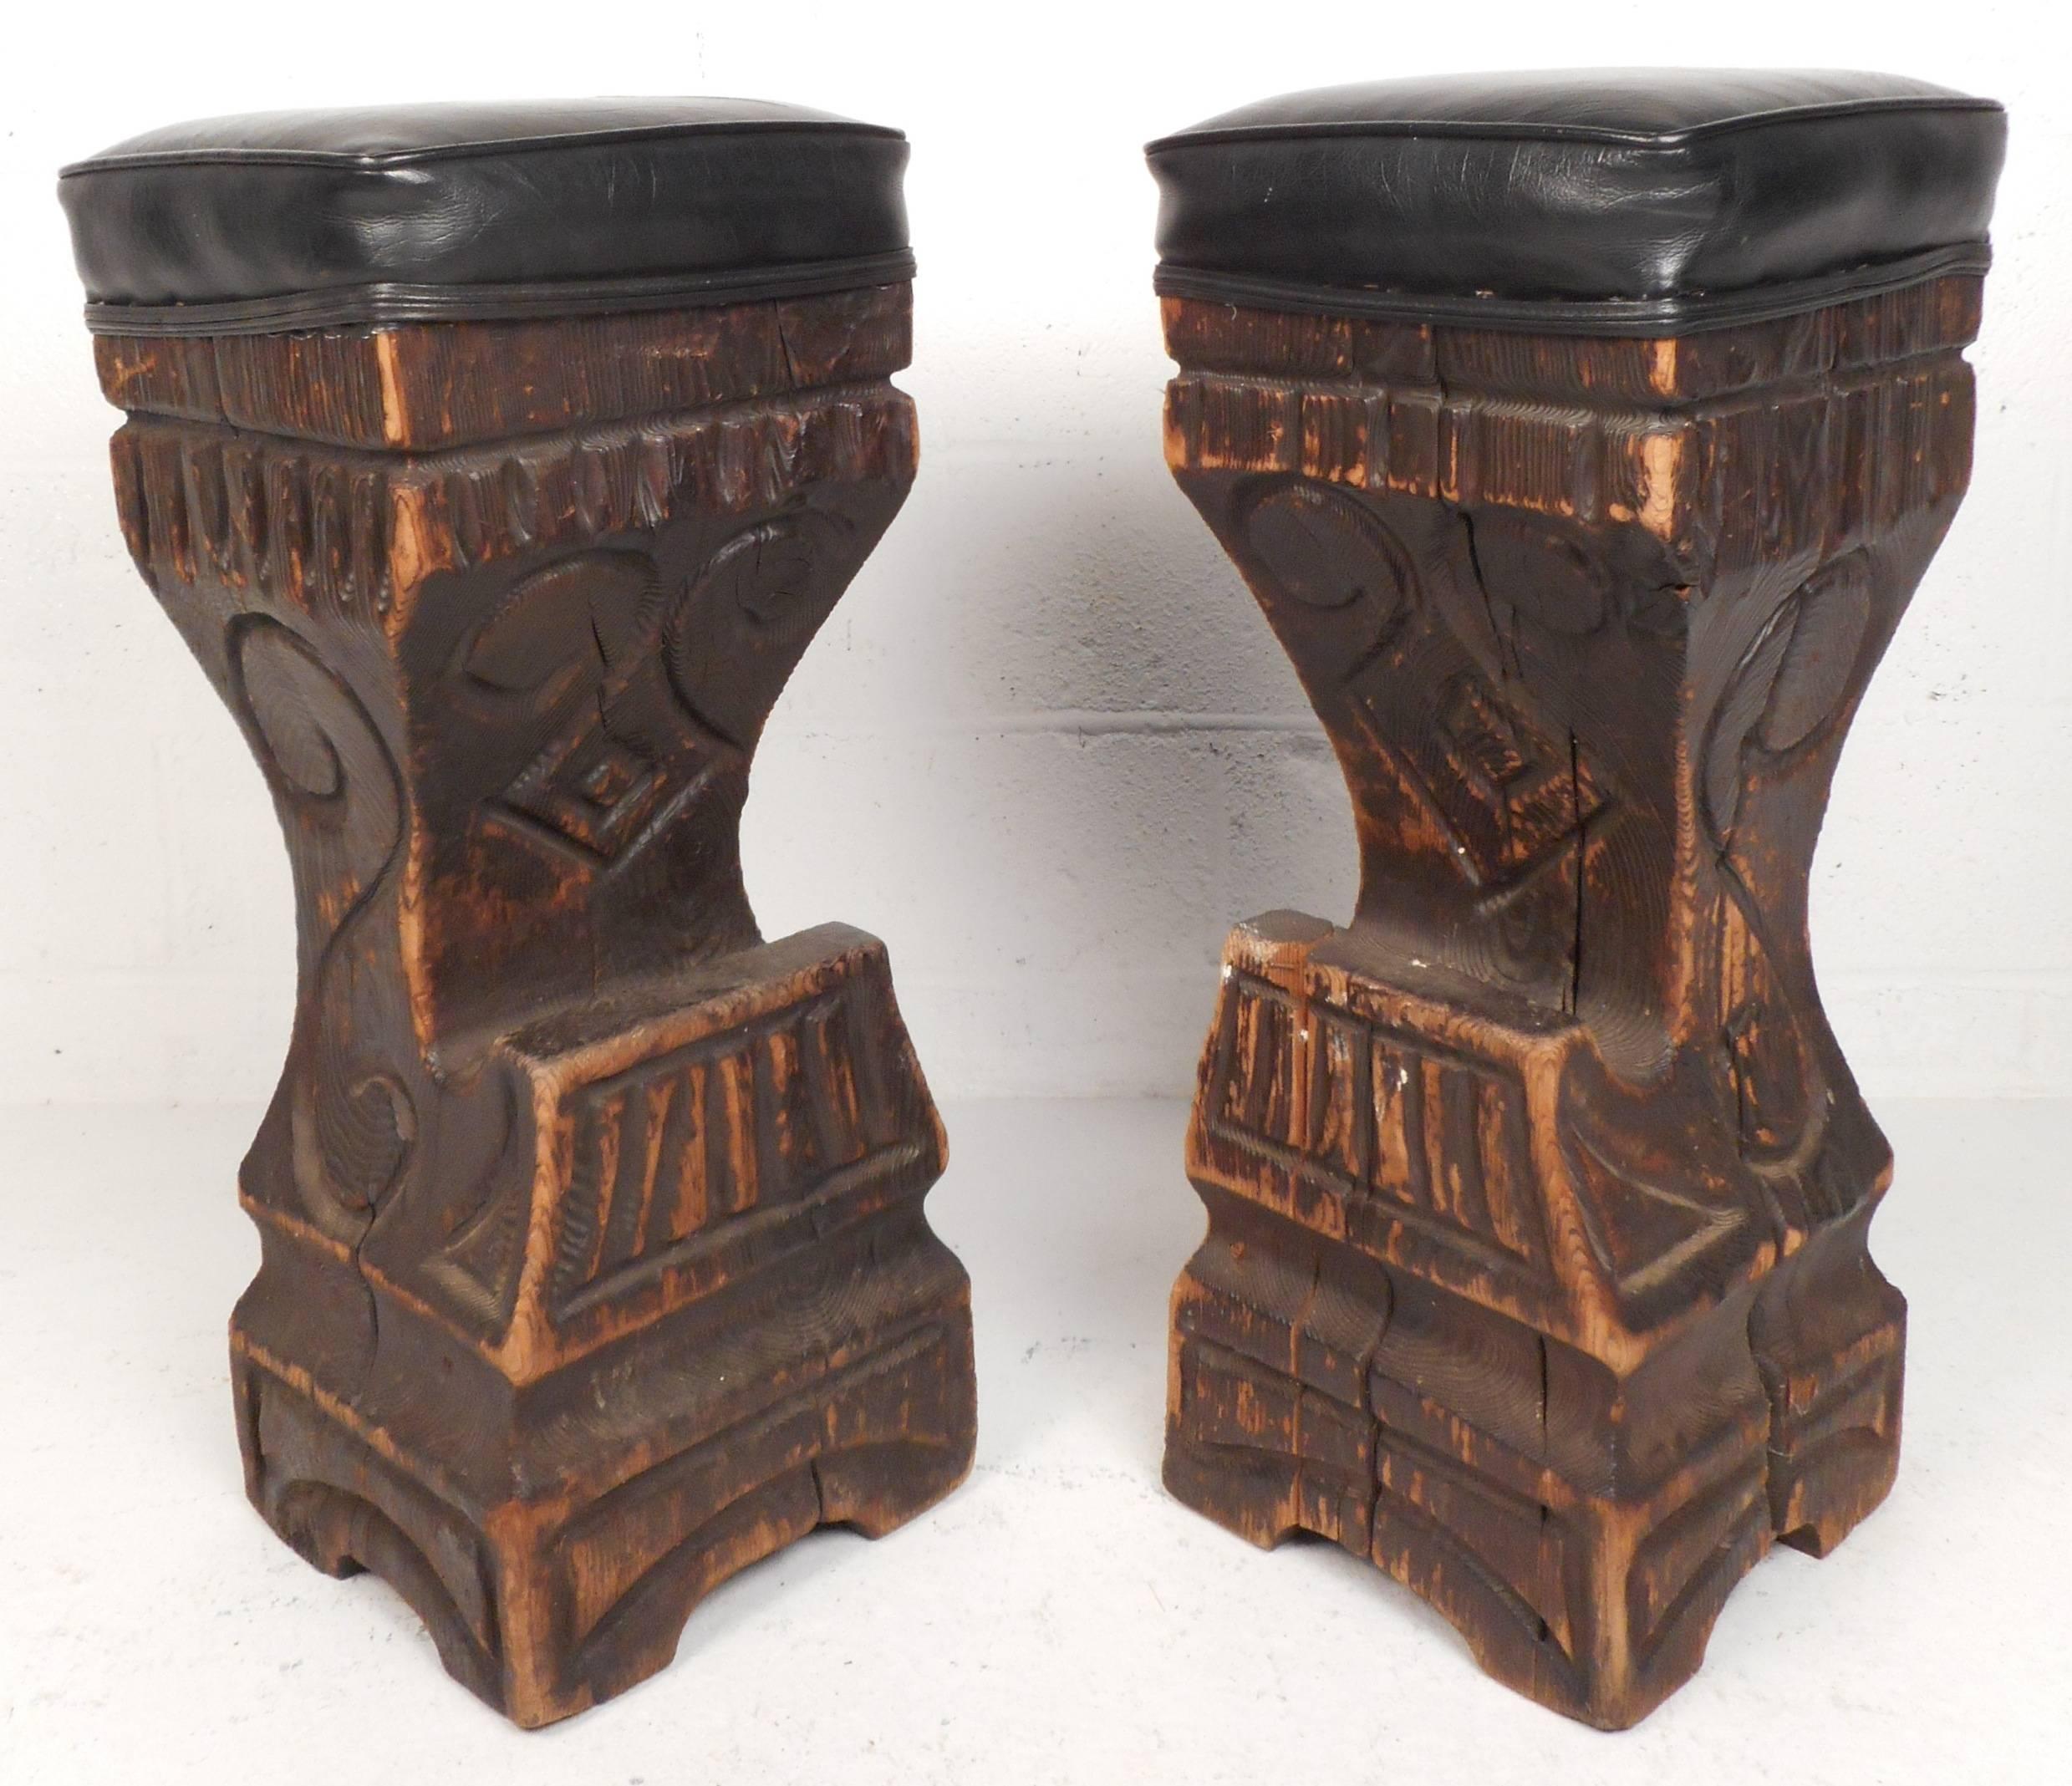 Stylish pair of vintage modern tiki bar stools feature teakwood bases with unique detailed south pacific primitive style carvings. The comfortable black vinyl seat offers comfort and style in any modern interior. Please confirm item location (NY or